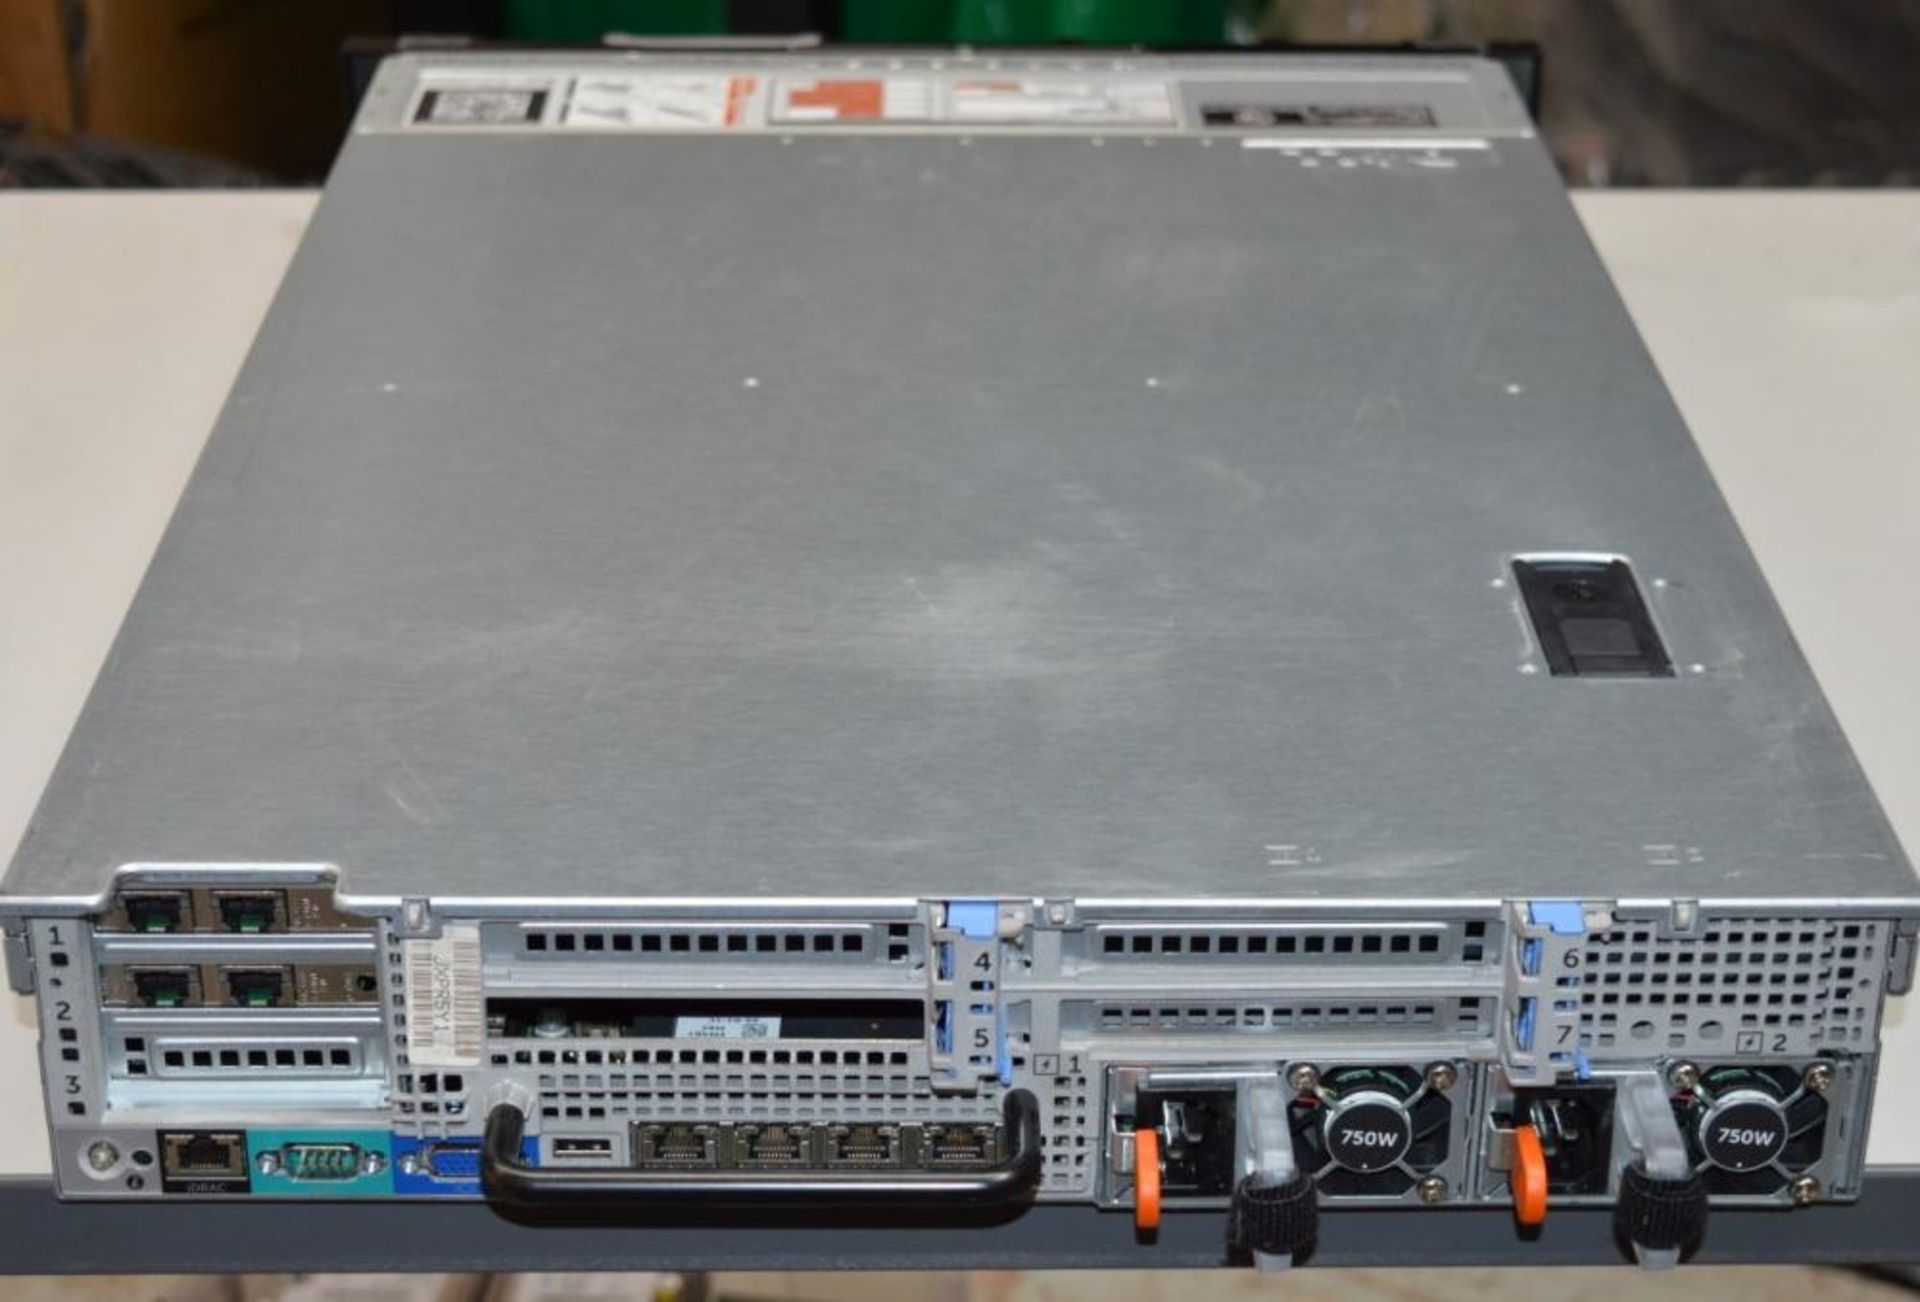 1 x Dell Power Edge R720 Rack Server - Features 2 x Intel Xeon E5-2630 Six Core CPU, 128gb DDR3 Ram - Image 2 of 6